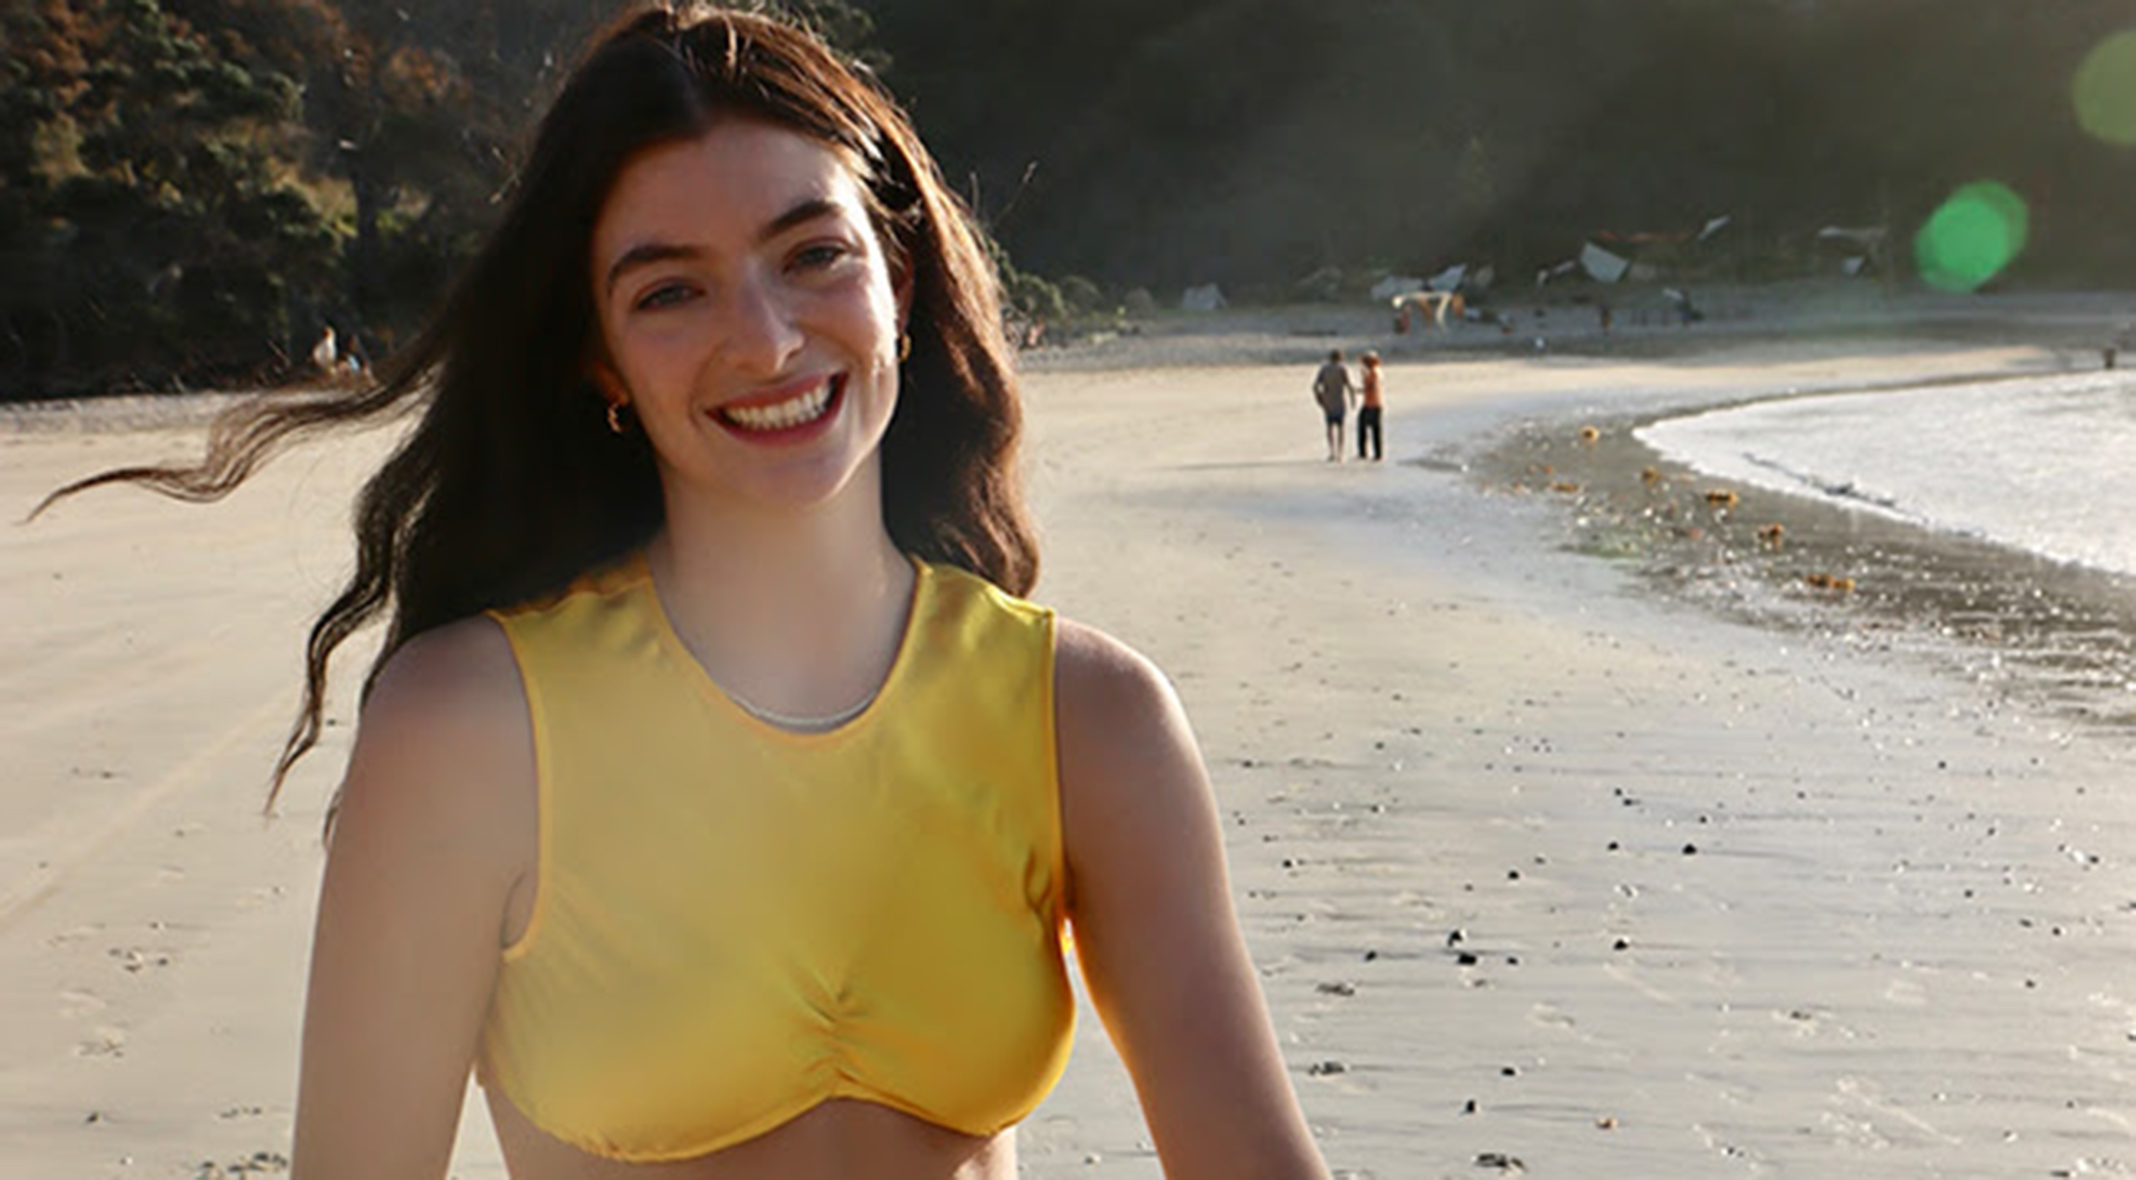 New Lorde album release date, title, tracklist, songs The FortyFive